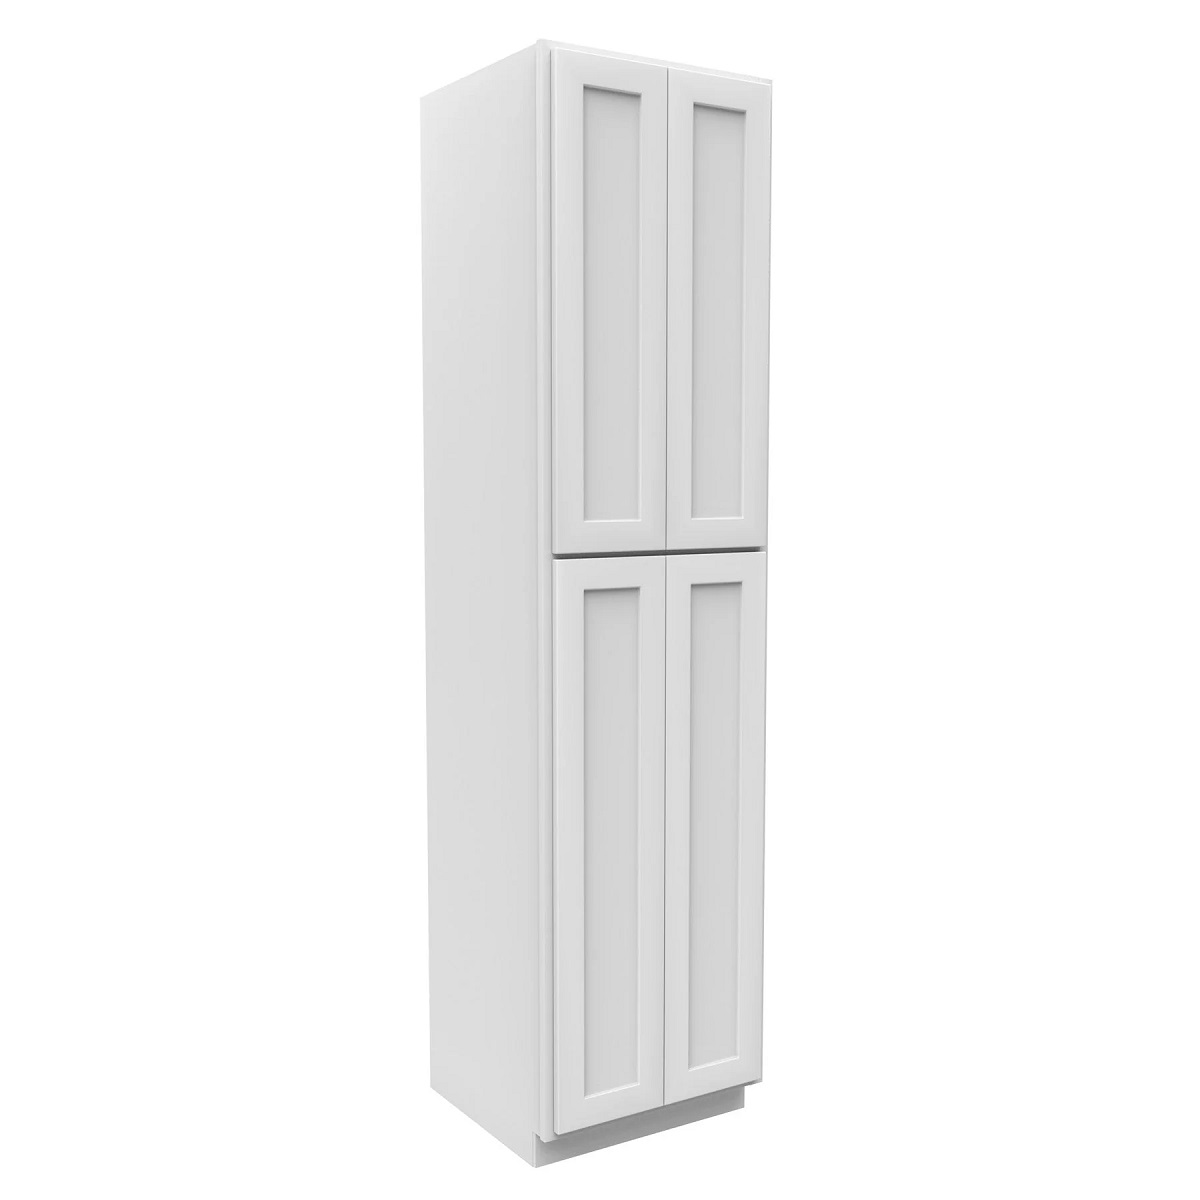 How Much Should An 8-Ft By 24-Inch Kitchen Pantry Cabinet Cost